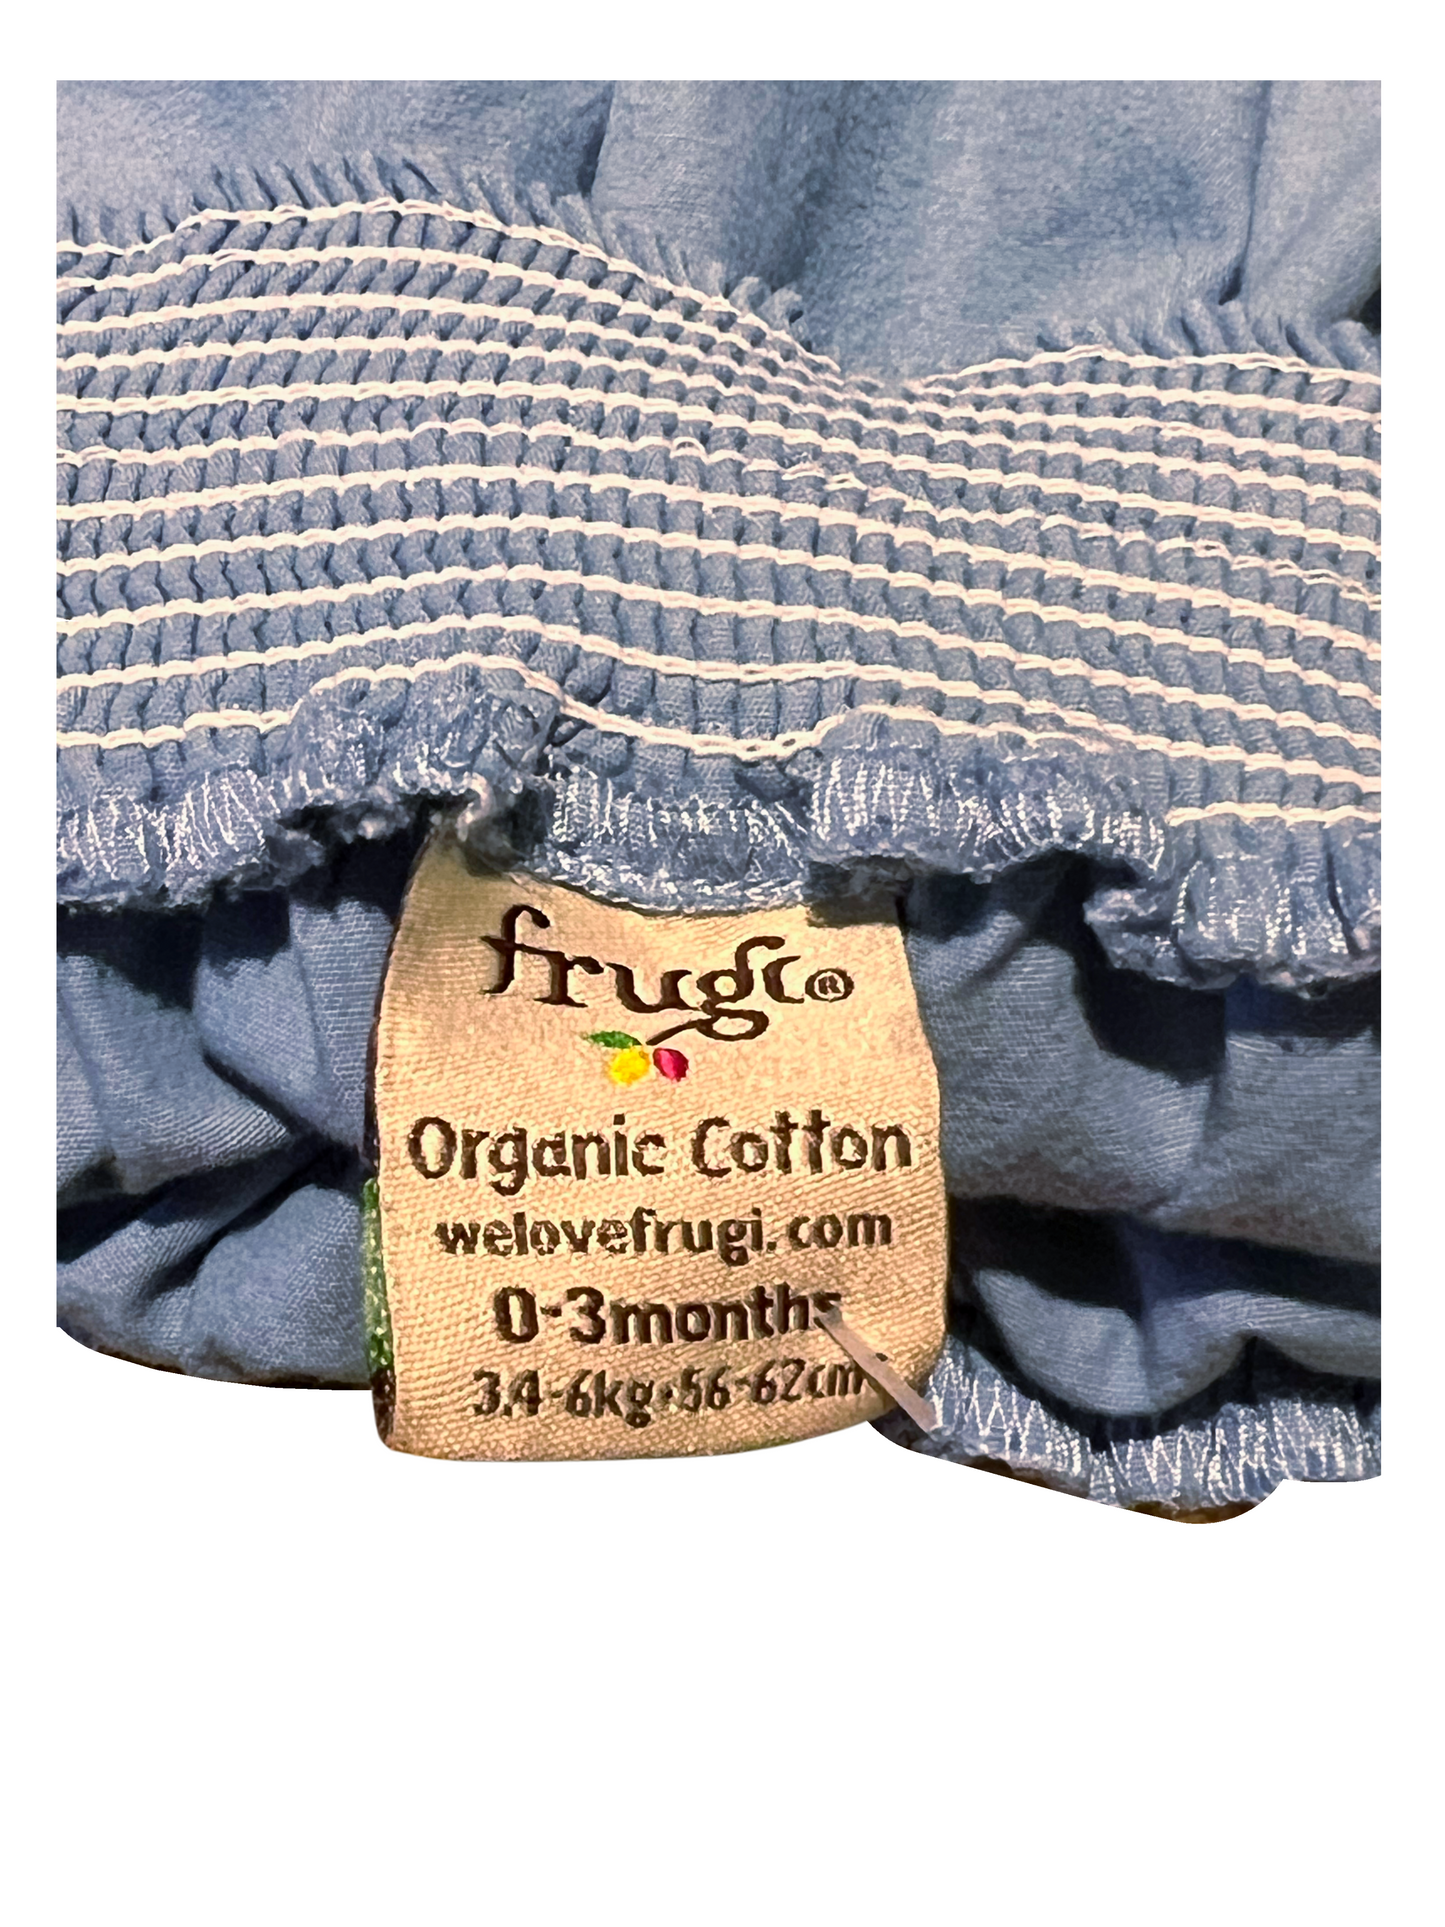 Frugi trousers 0-6 months